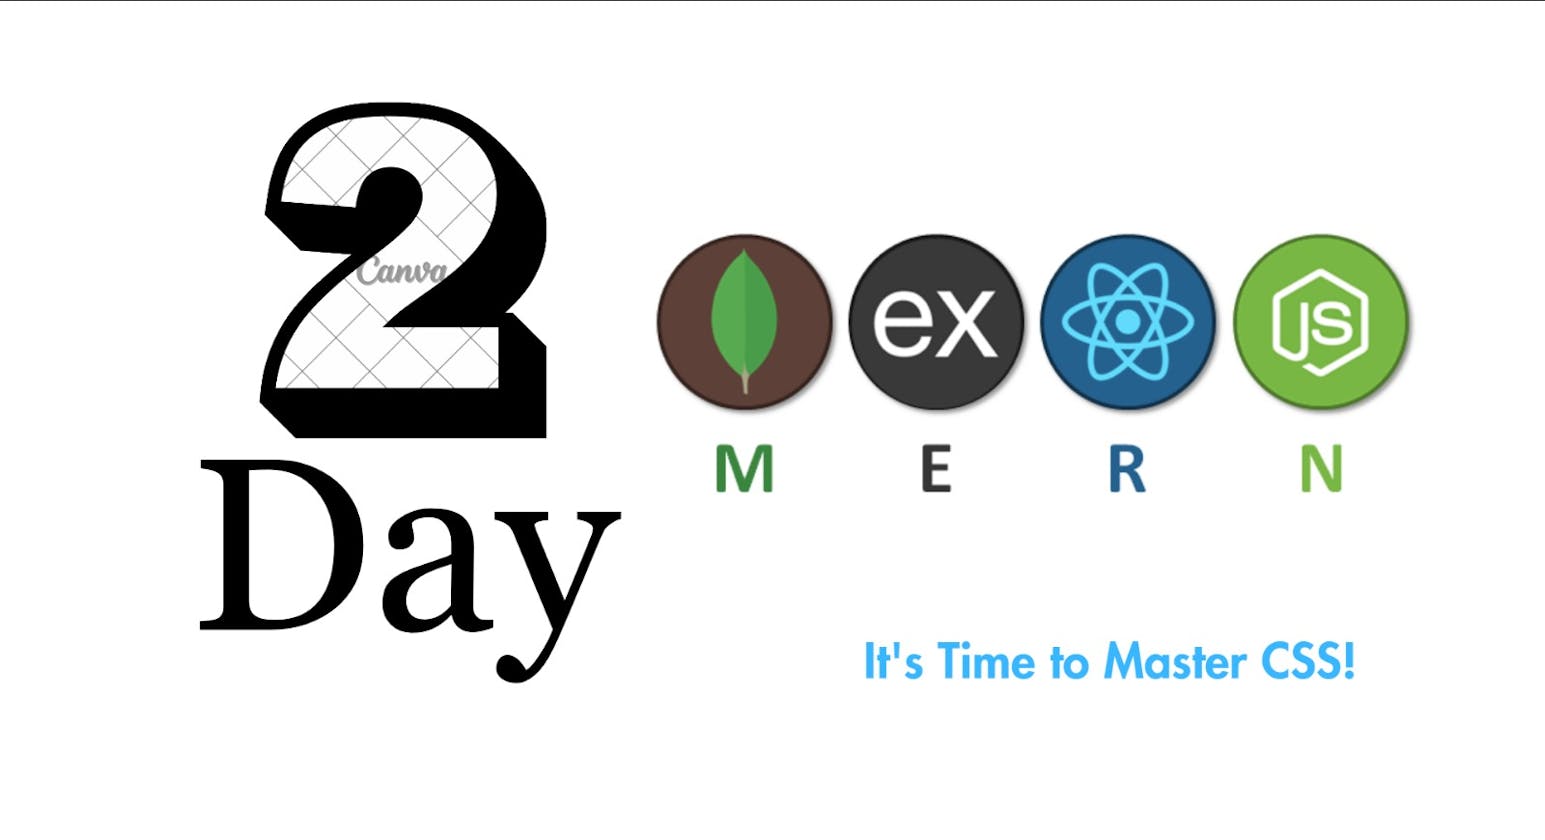 Day 2 of 100 Days of MERN Stack Development Learning: Journey Through HTML and CSS